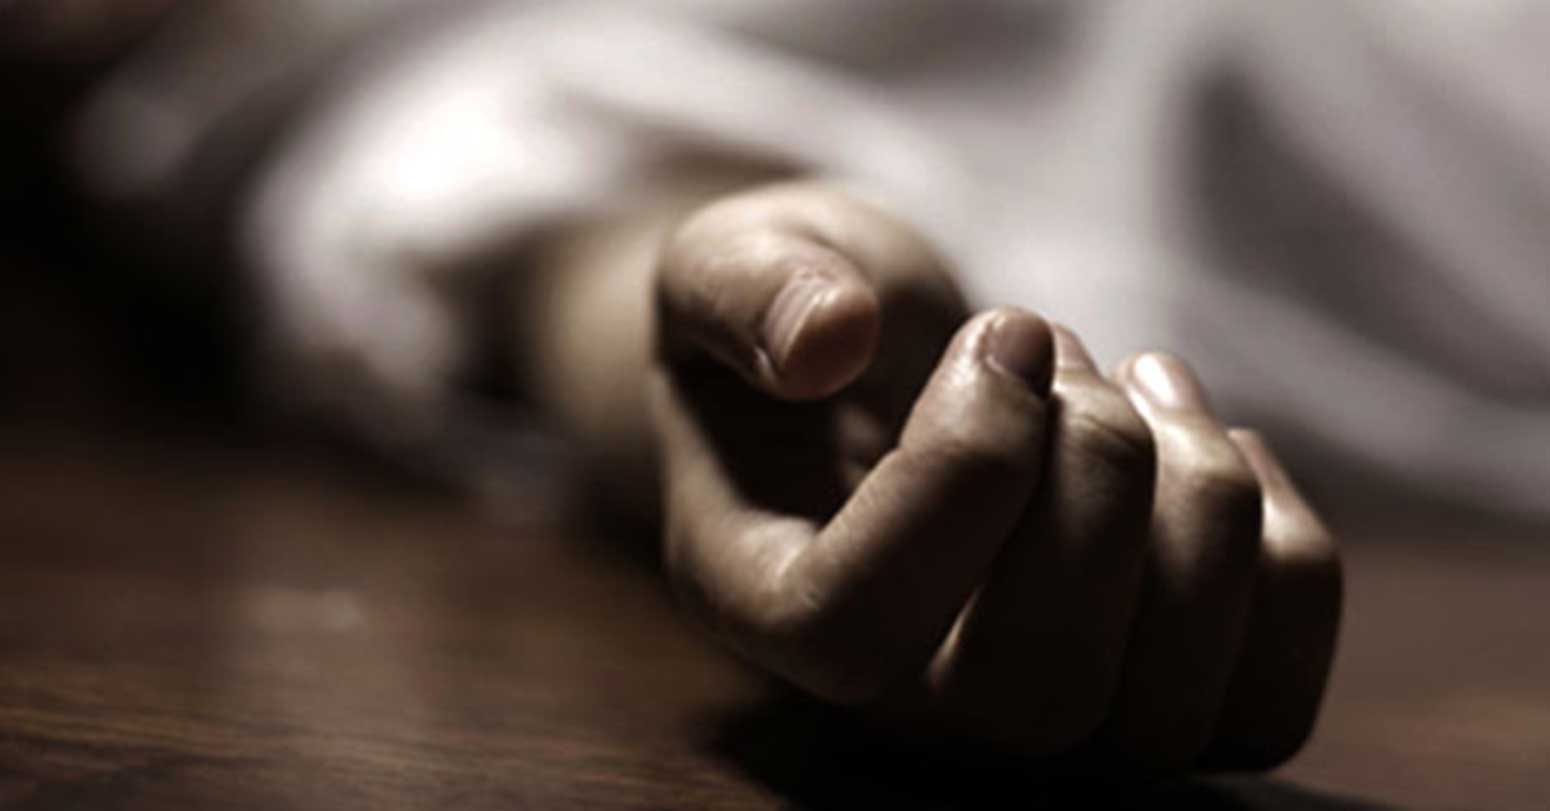 five-of-a-family-found-unconscious-at-ramkot-one-dies-during-treatment